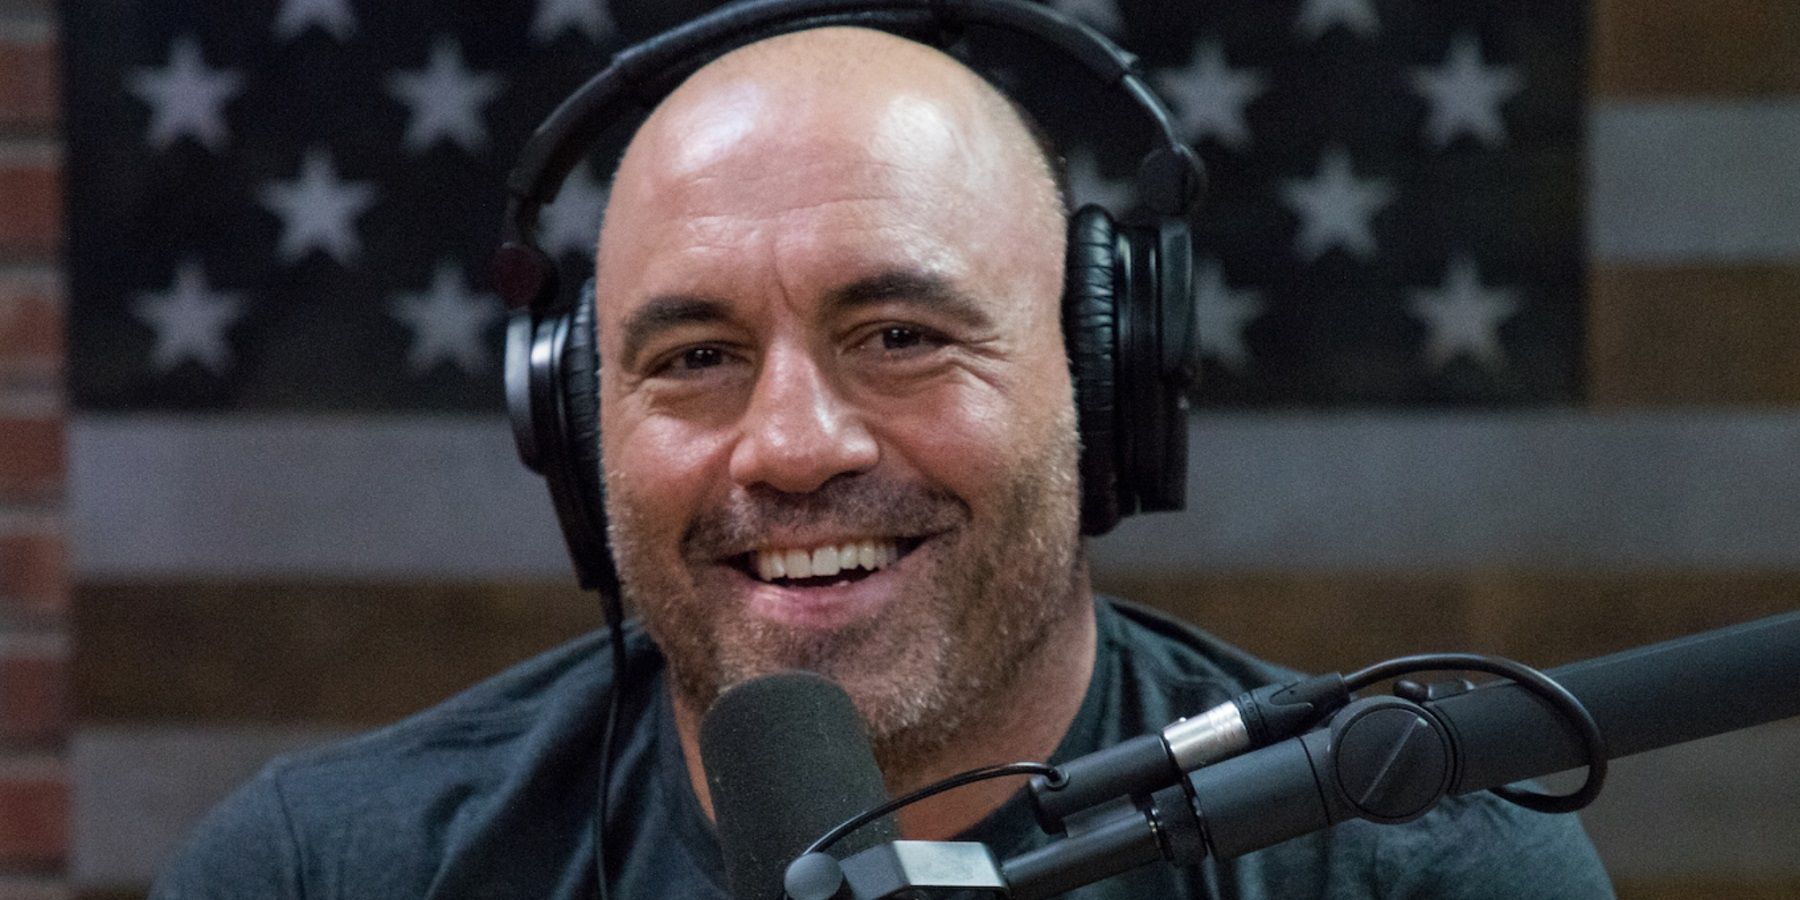 Joe Rogan Young & Healthy Vaccine Podcast Comments Controversy Explained